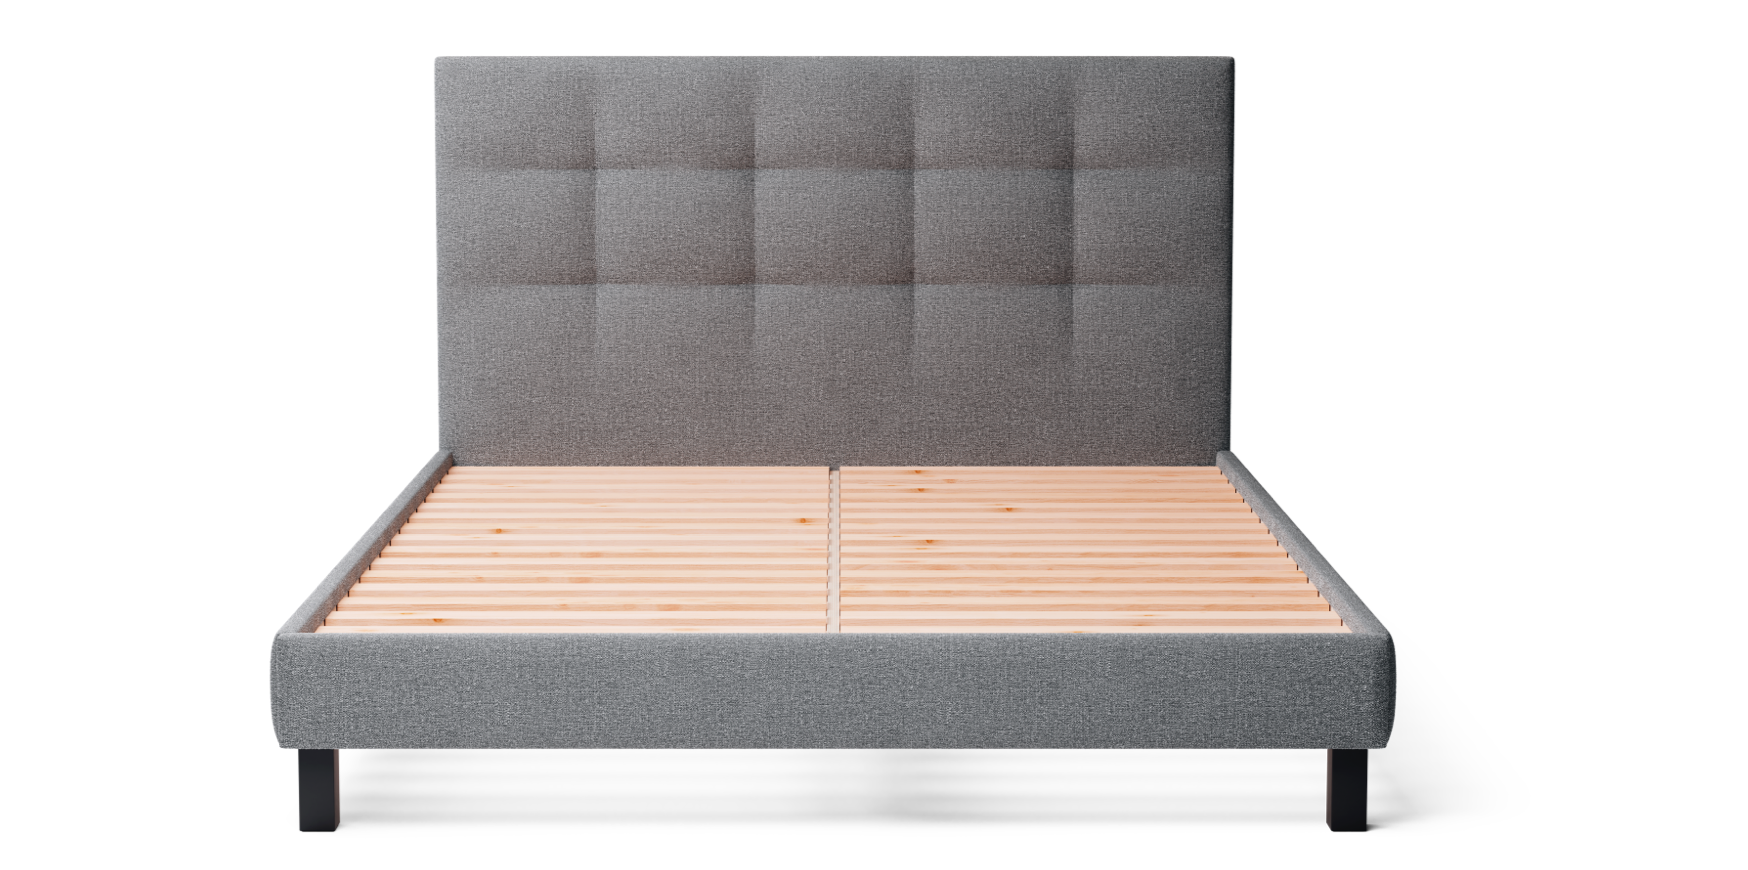 Product image showing the Endy Upholstered Bed,